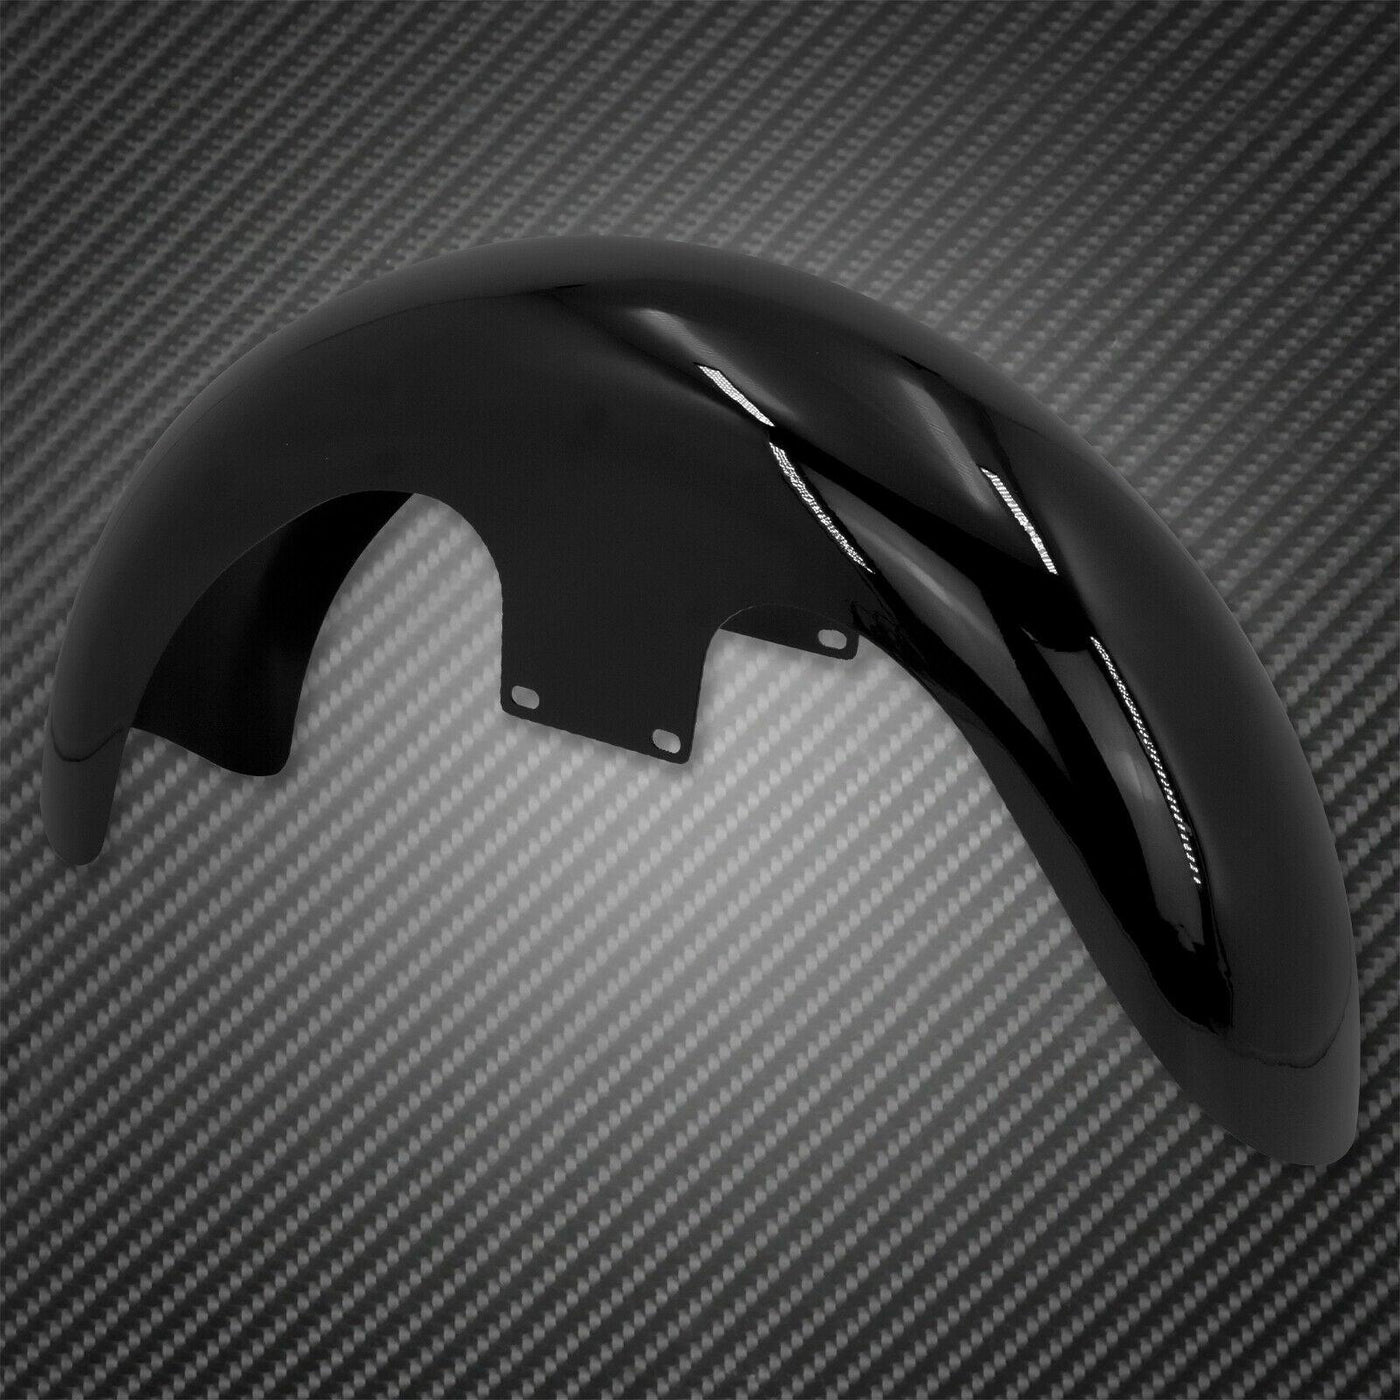 Gloss Black 23" Wrap Front Fender Fit For Harley Touring Electra Street Glides - Moto Life Products